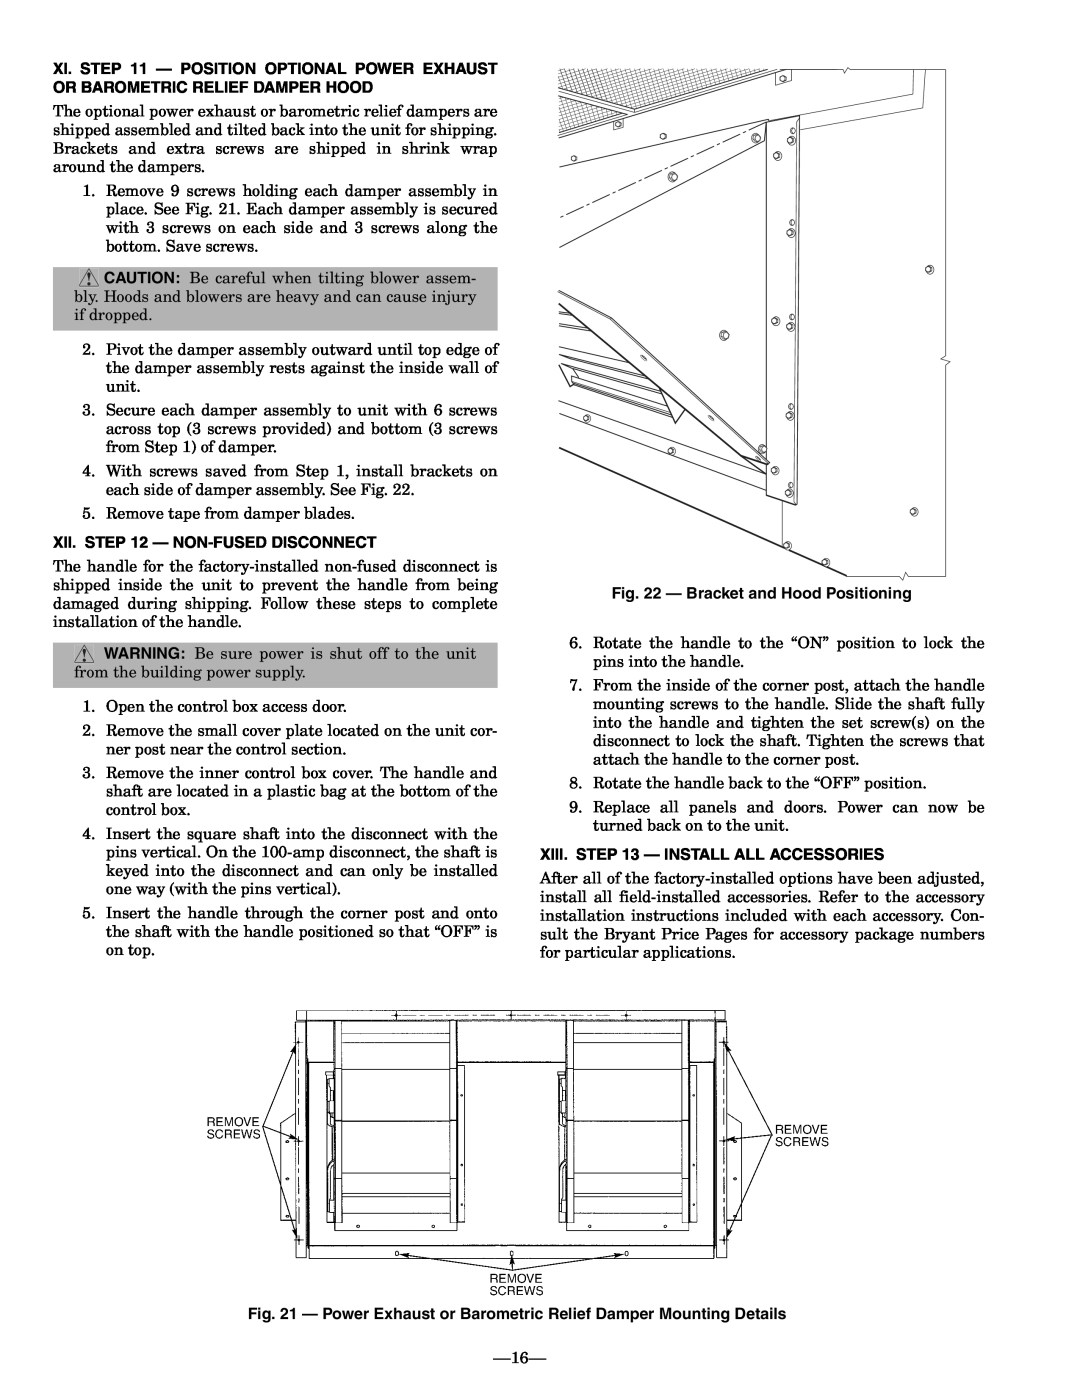 Bryant 581A operation manual Xii. - Non-Fuseddisconnect, Bracket and Hood Positioning, Xiii. - Install All Accessories 